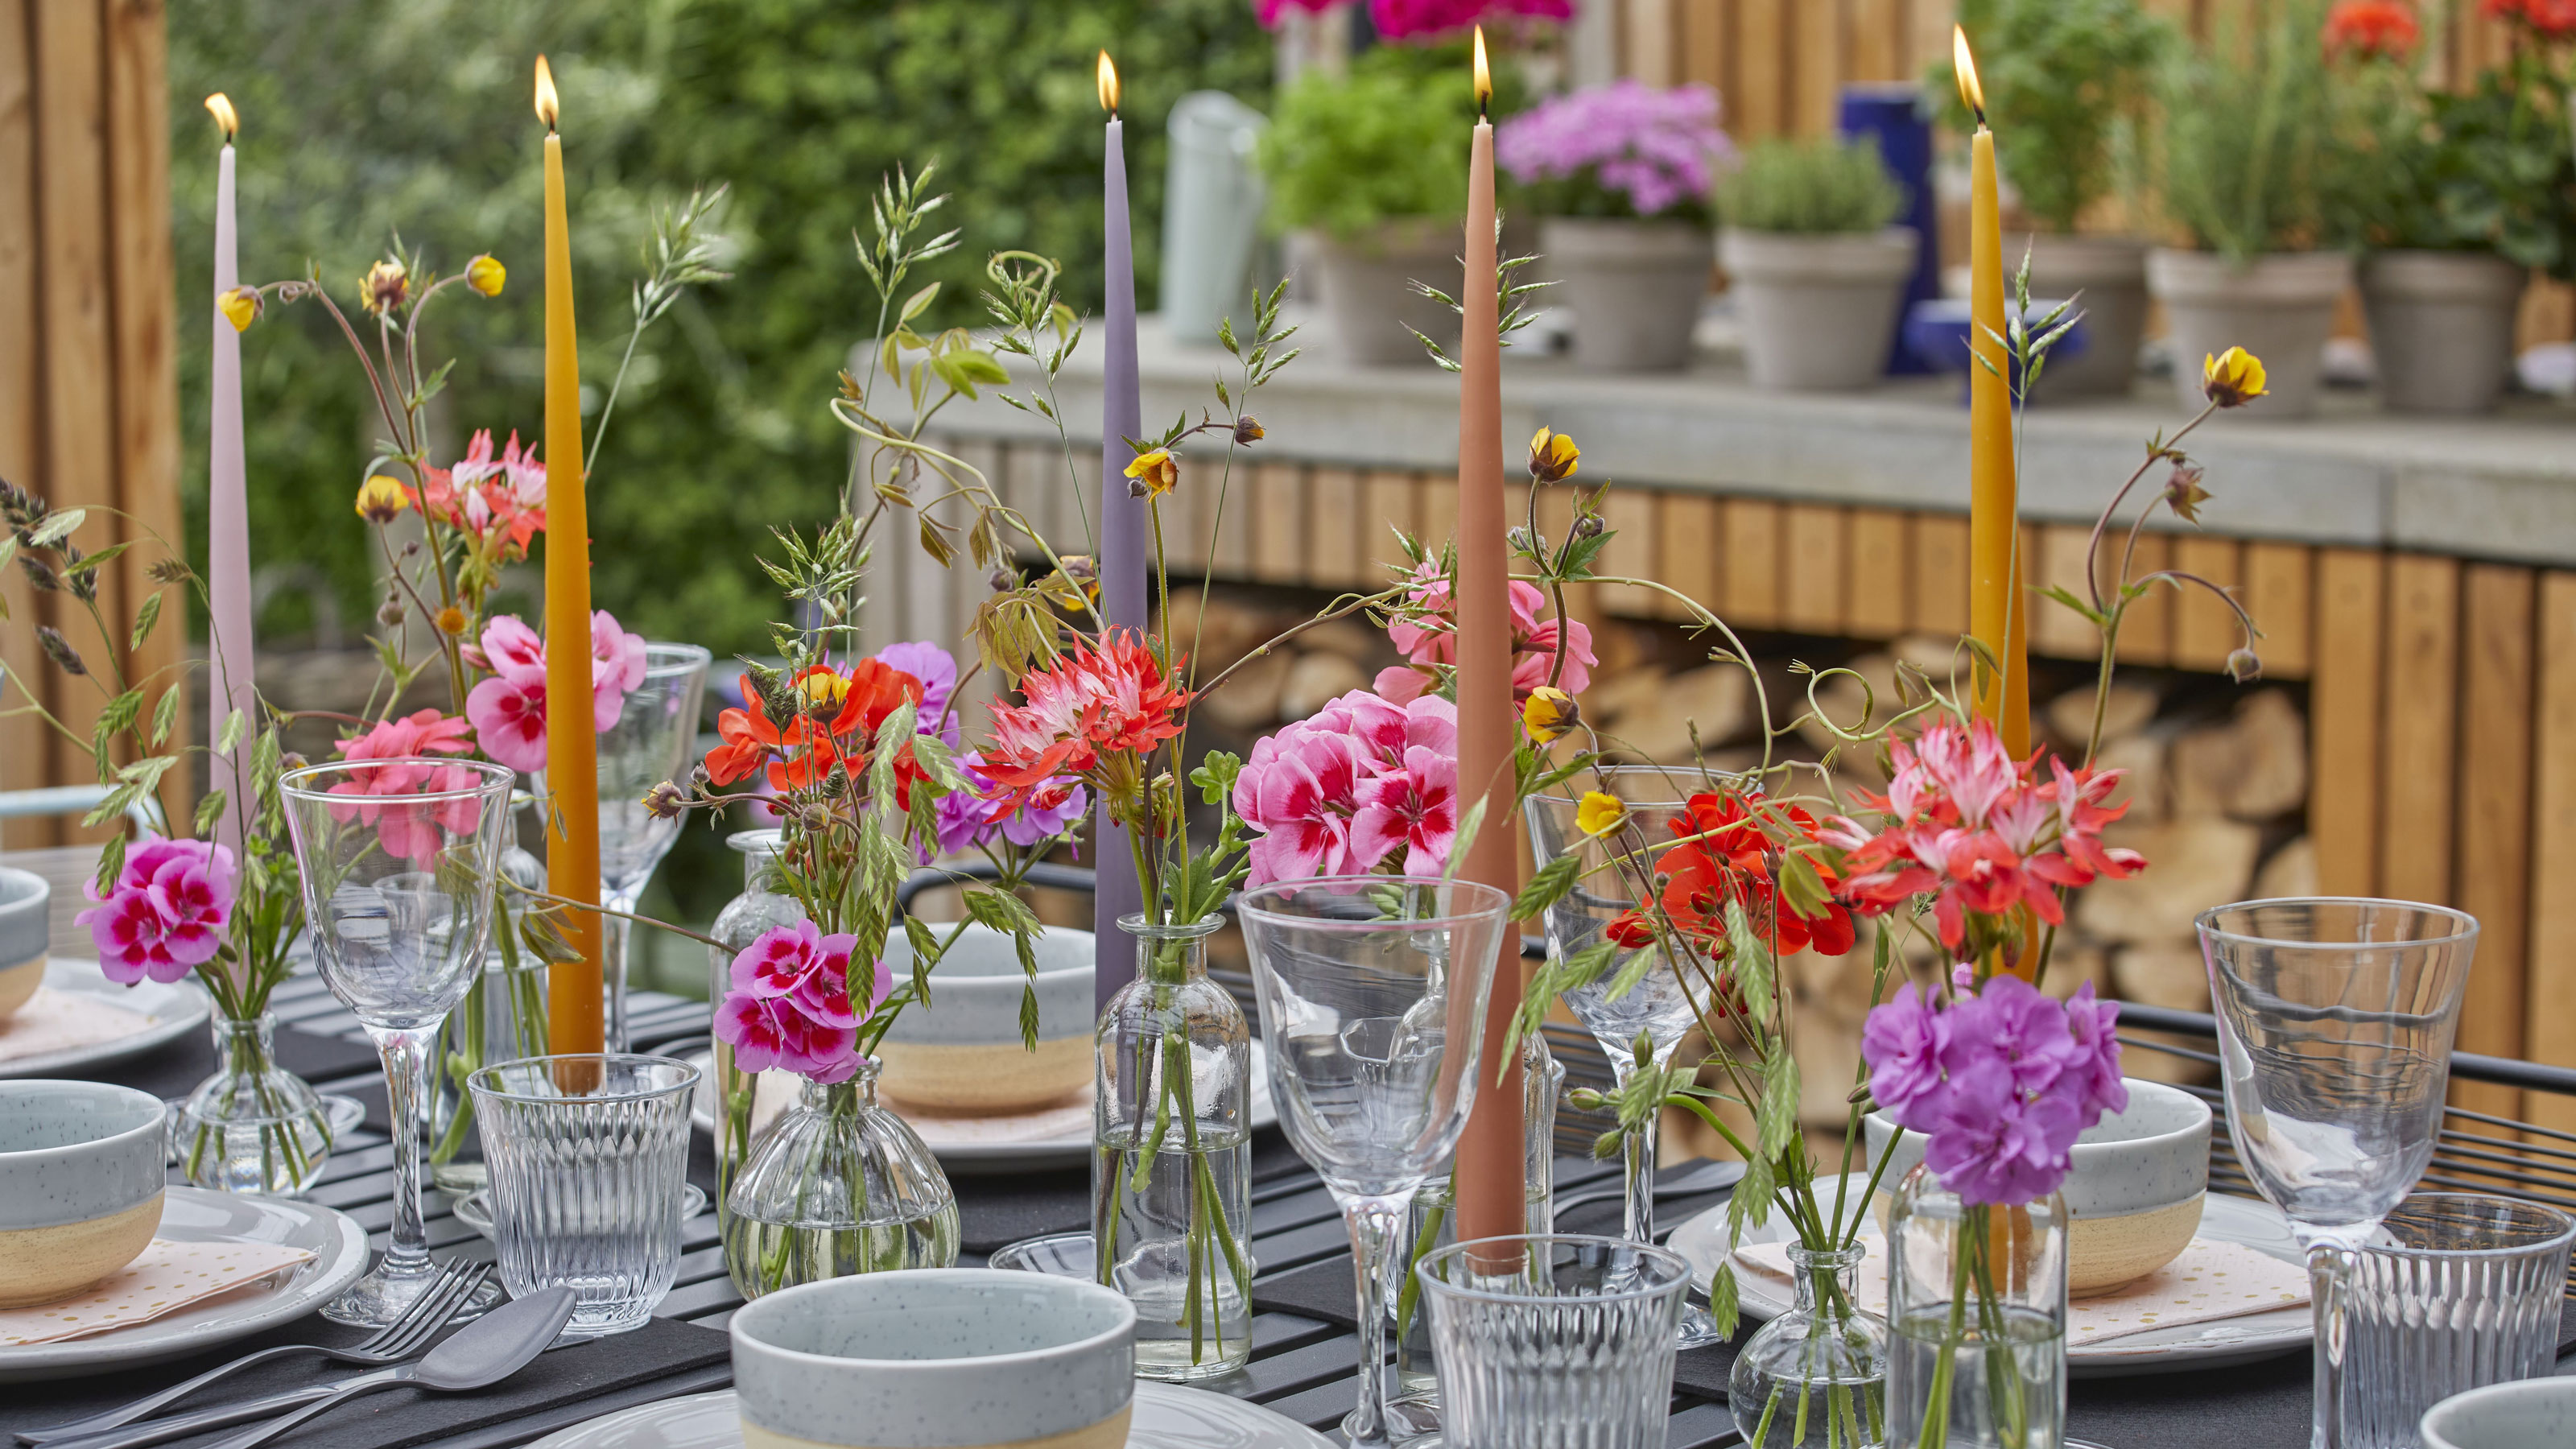 Outdoor table decorating ideas: 16 pretty looks to try | Gardeningetc